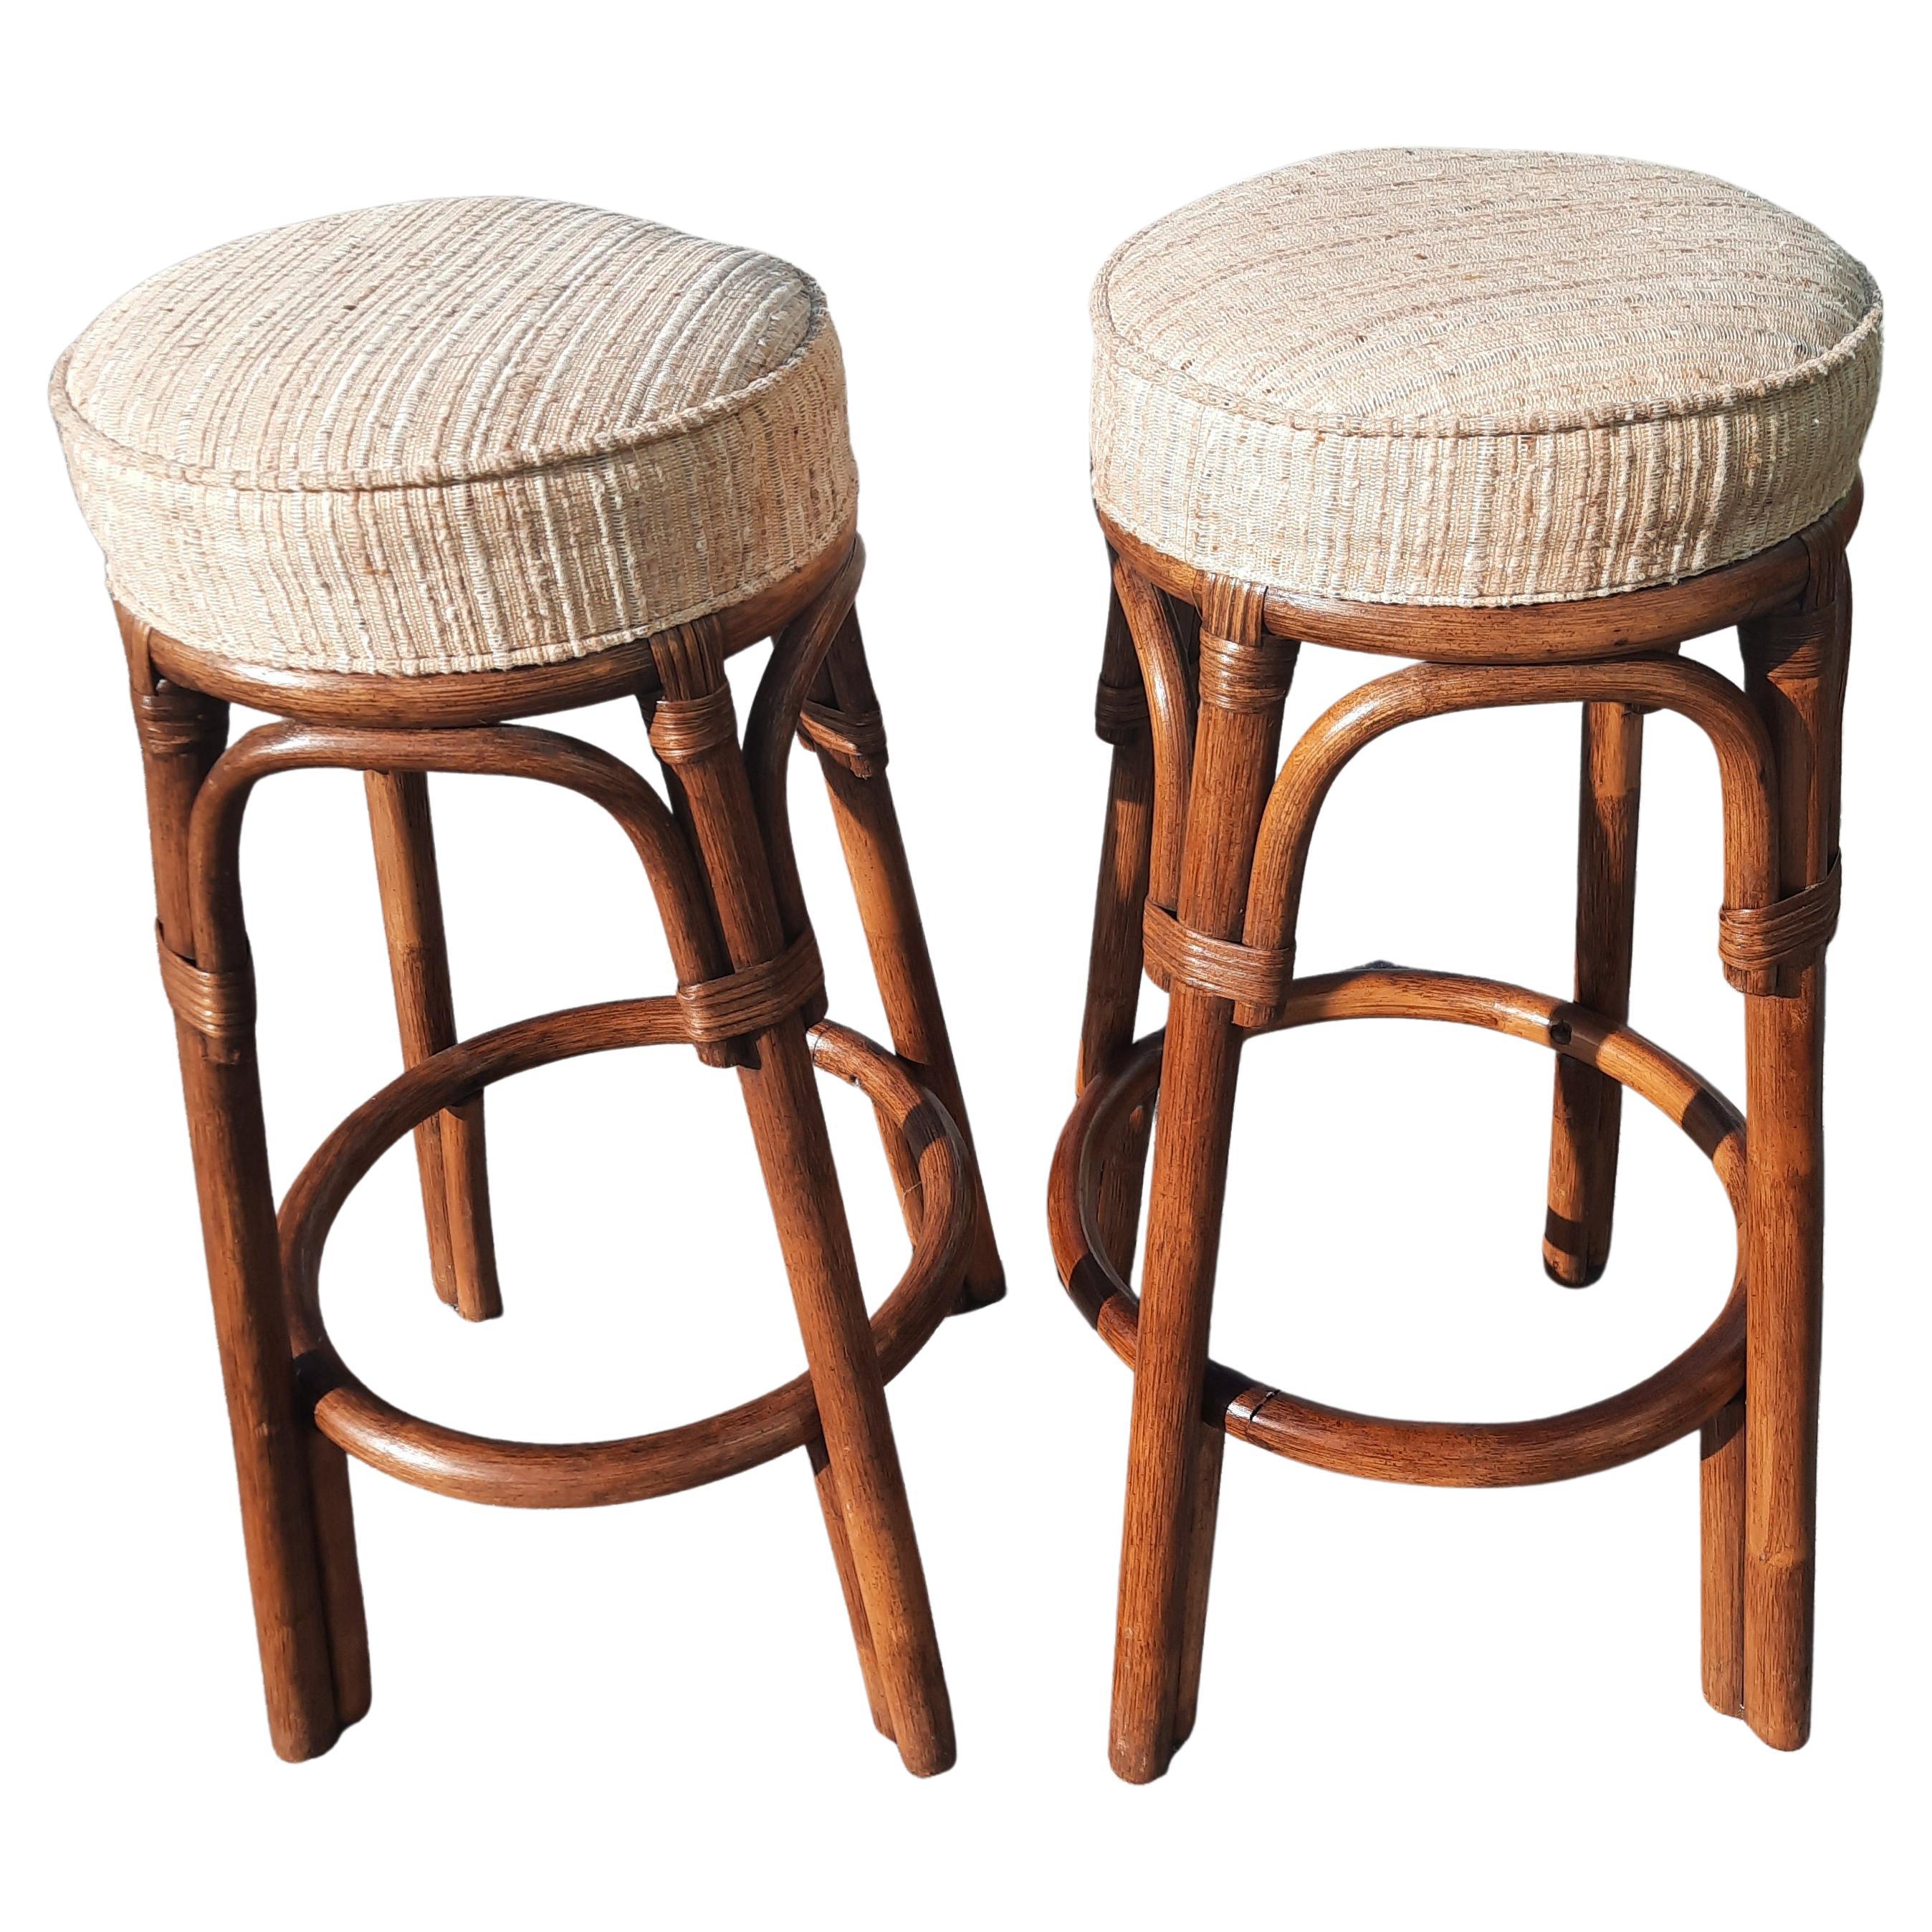 Stacked Rattan and Woven Wicker Bar and Stools Set, circa 1970s For Sale 3